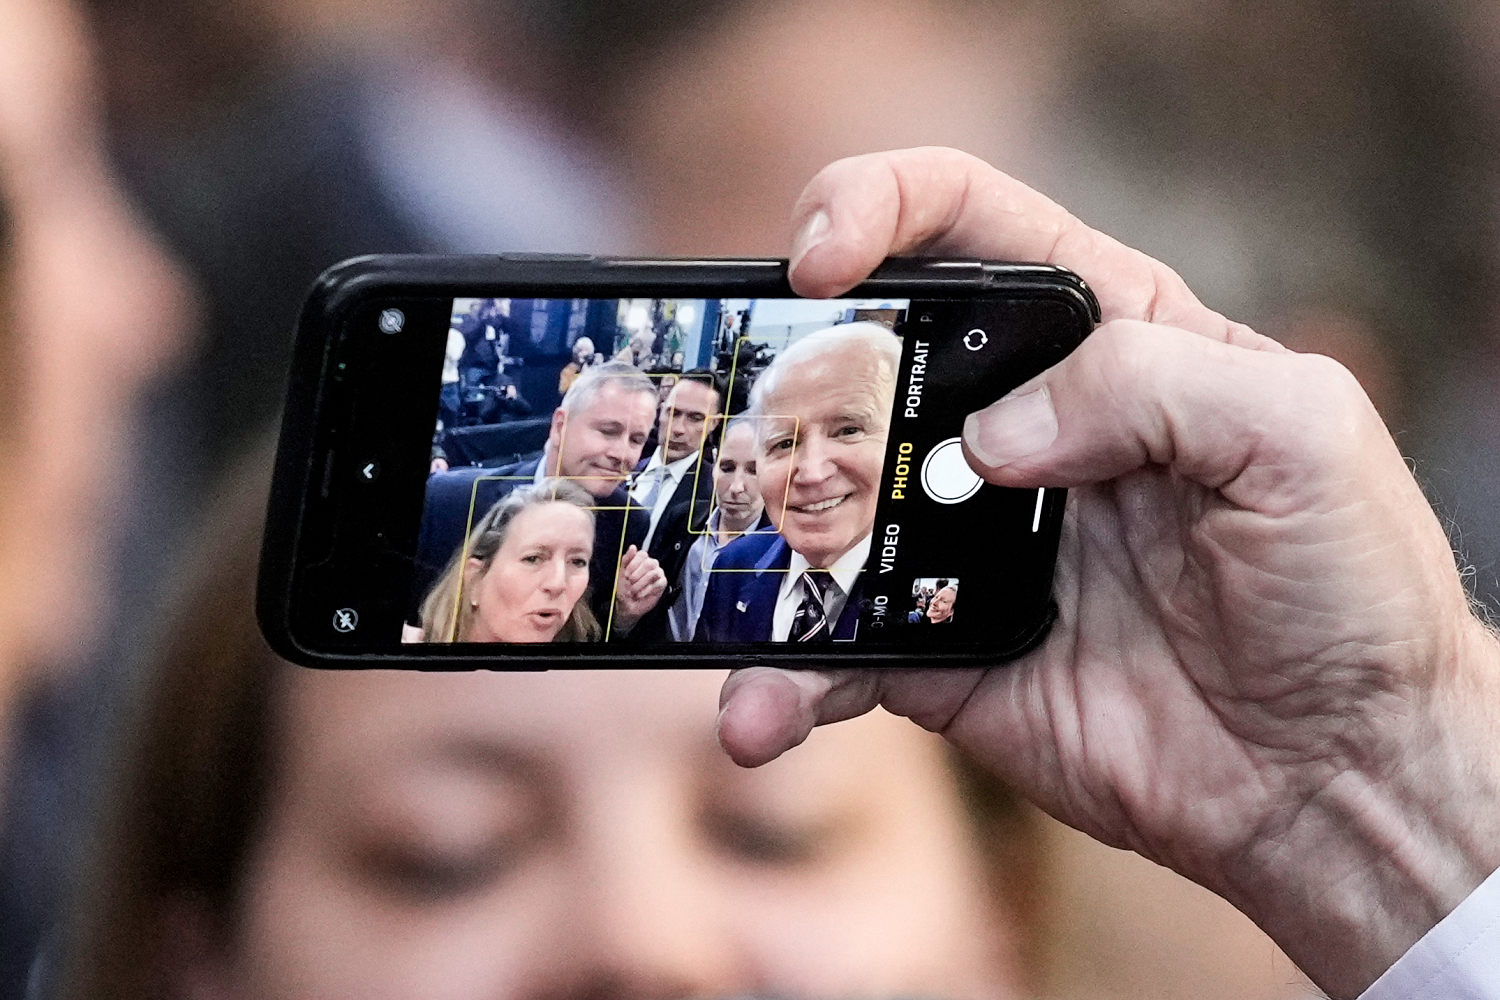 Biden's strategy to reach tuned-out voters: Content over crowds